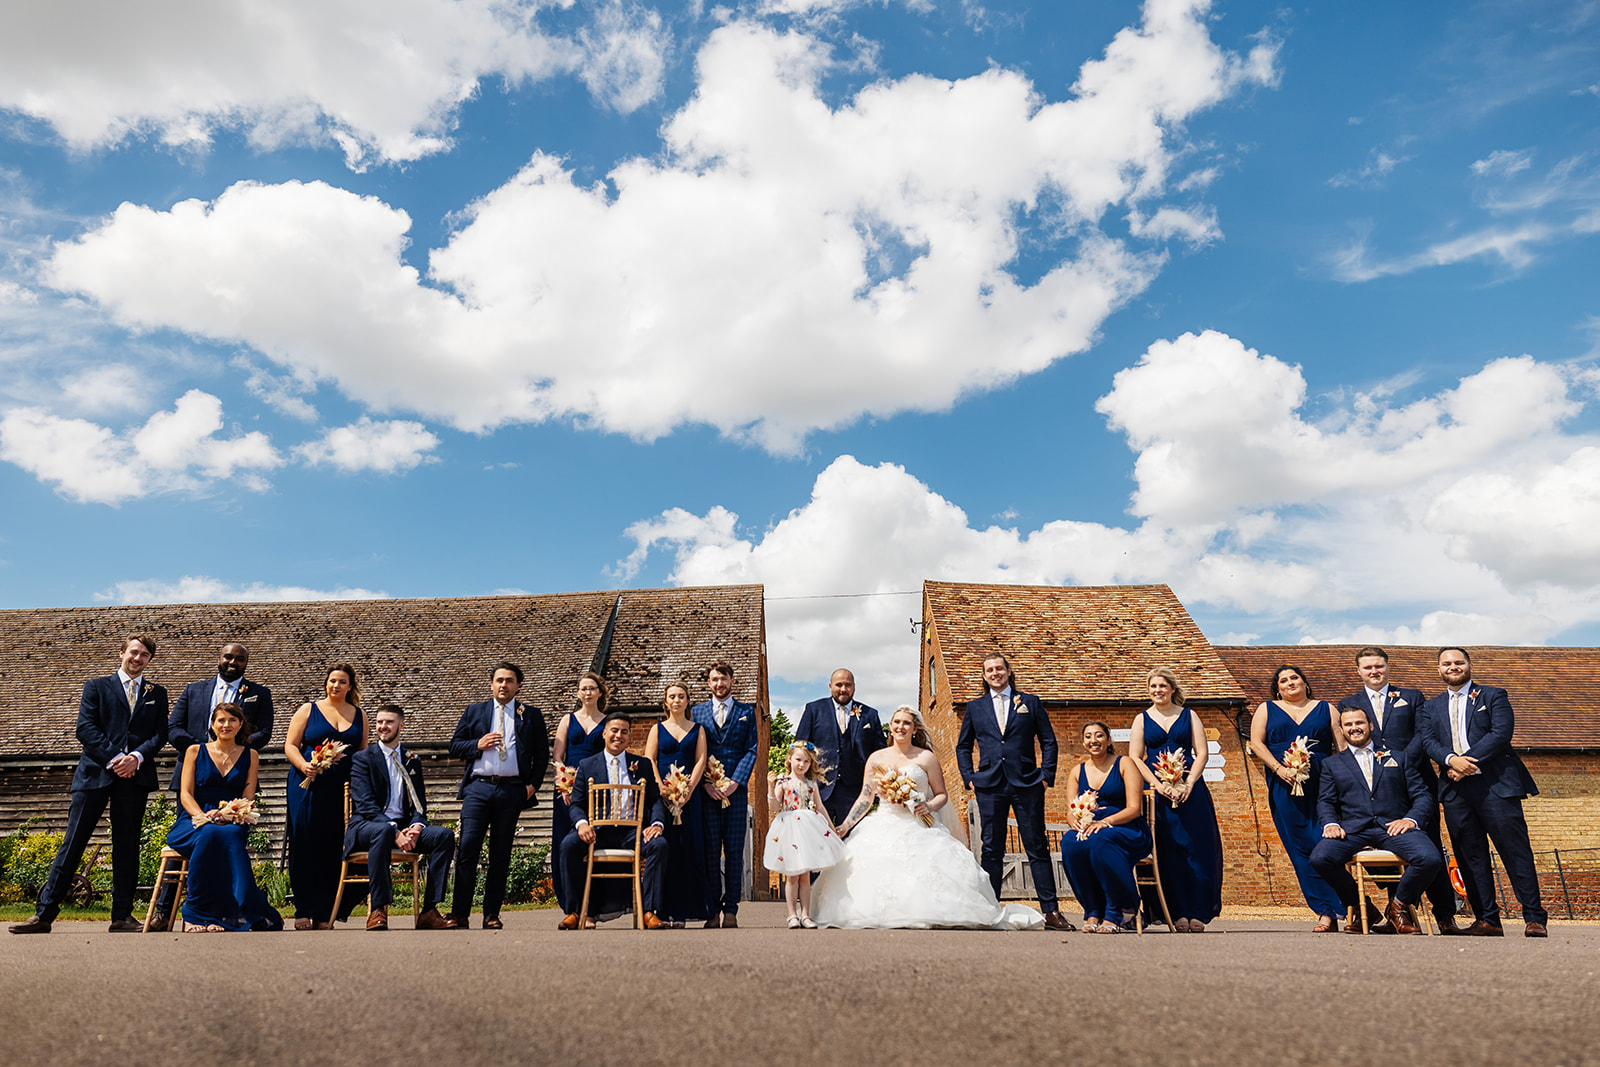 Couple with entire bridal party and Groomsmen outside in courtyard